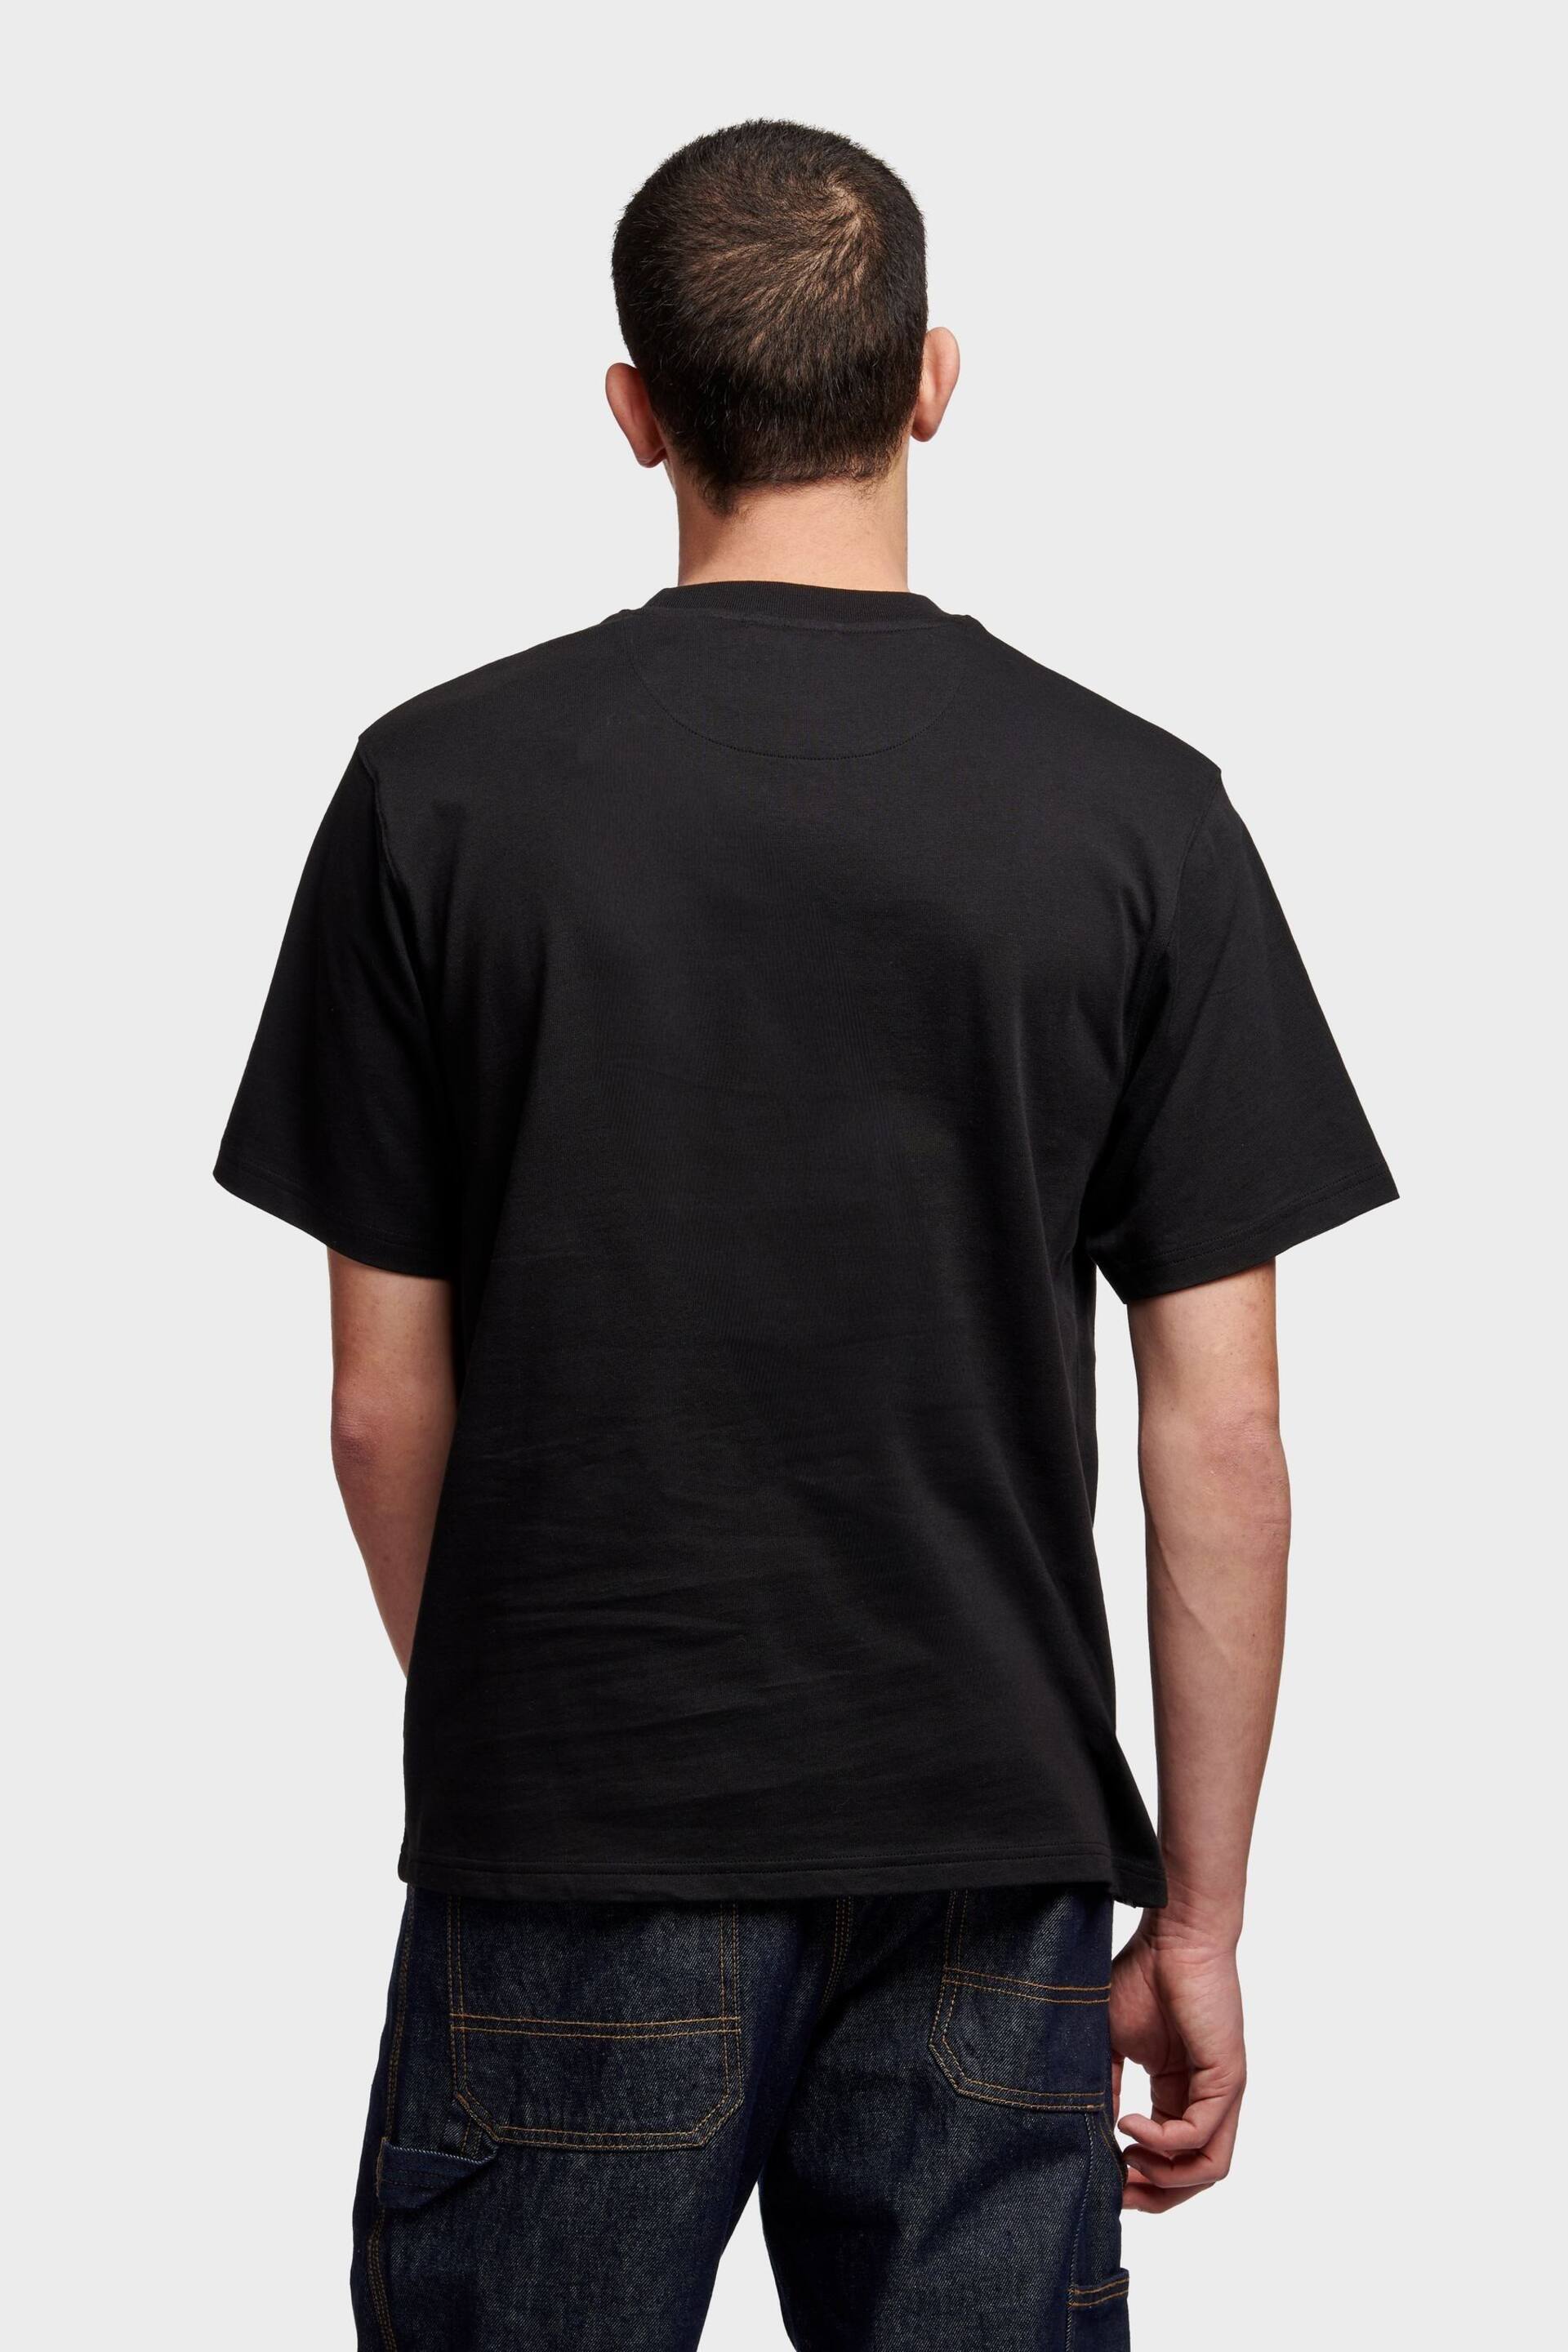 Penfield Mens Relaxed Fit Original Logo T-Shirt - Image 6 of 8